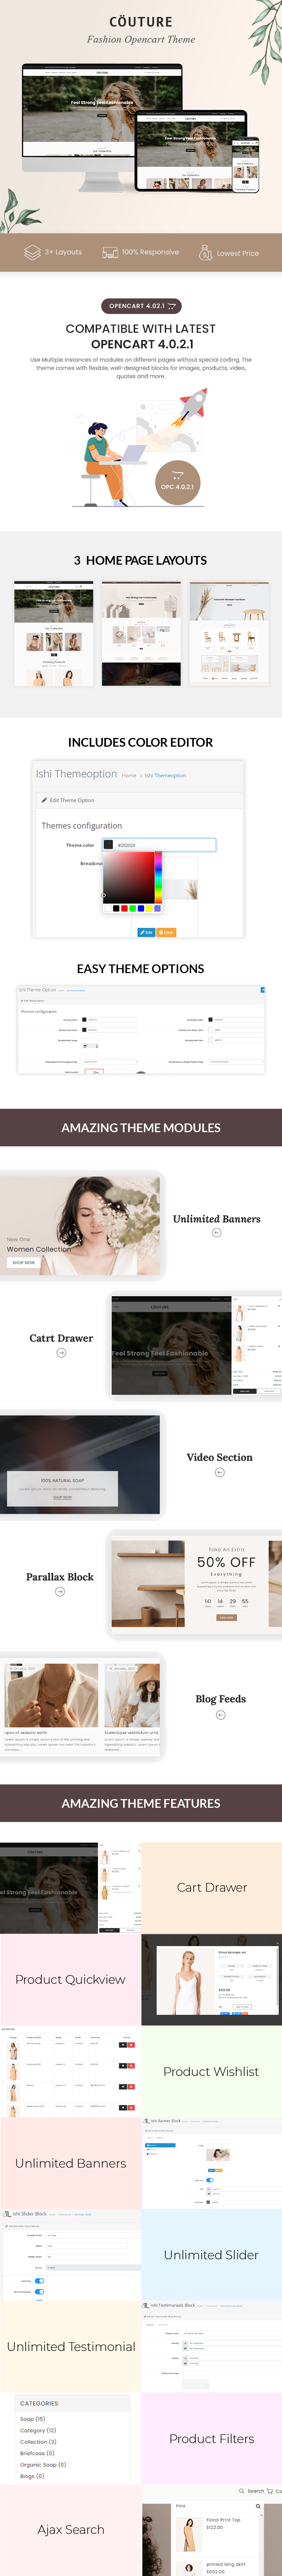 Couture – Clothing and Fashion Opencart Theme